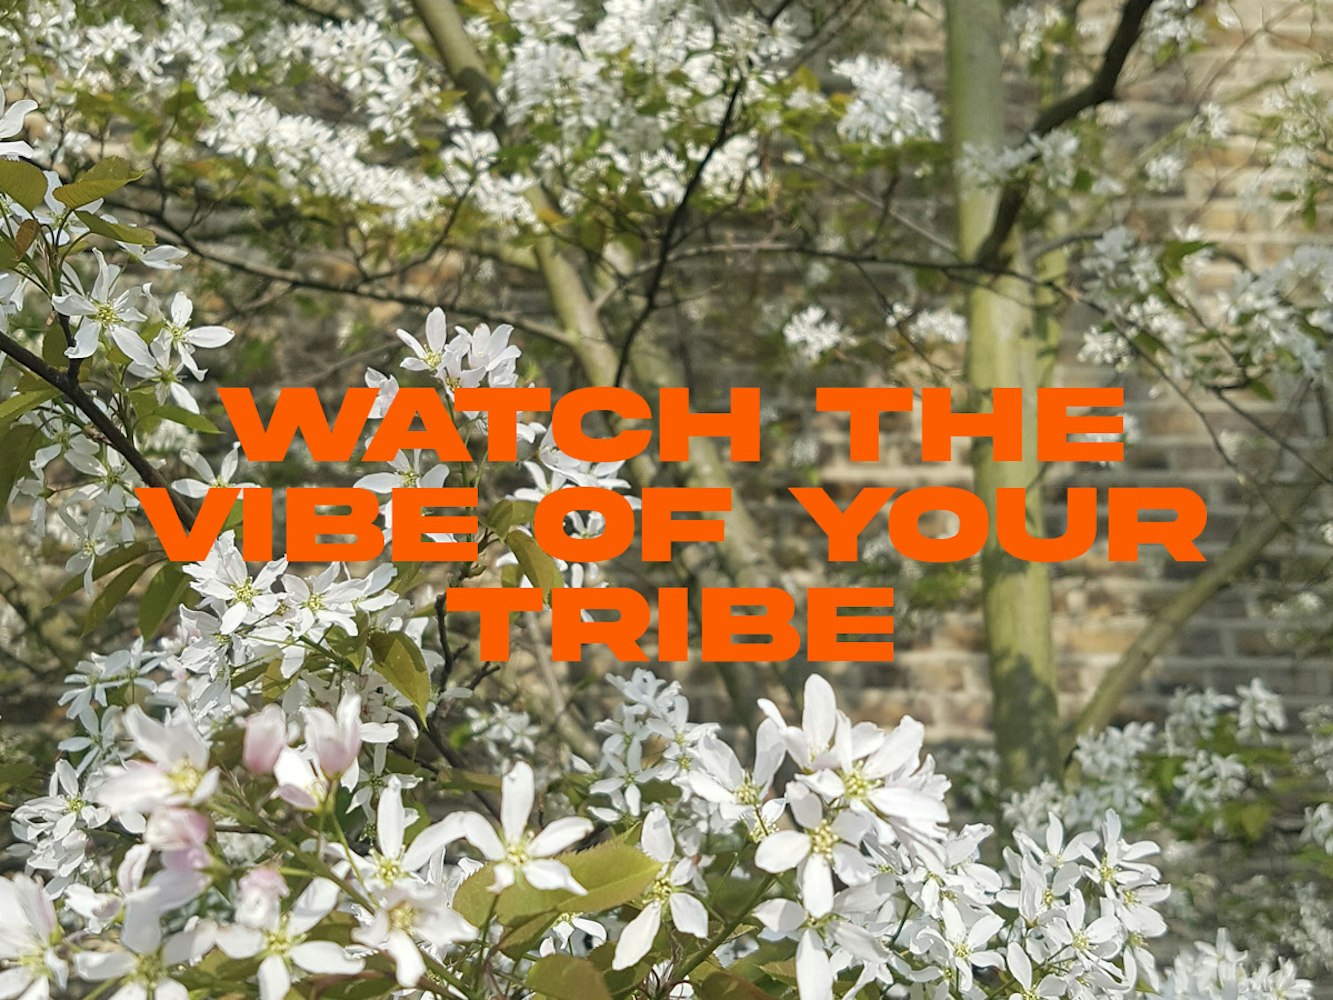 Cover Image for Watch the vibe of your tribe